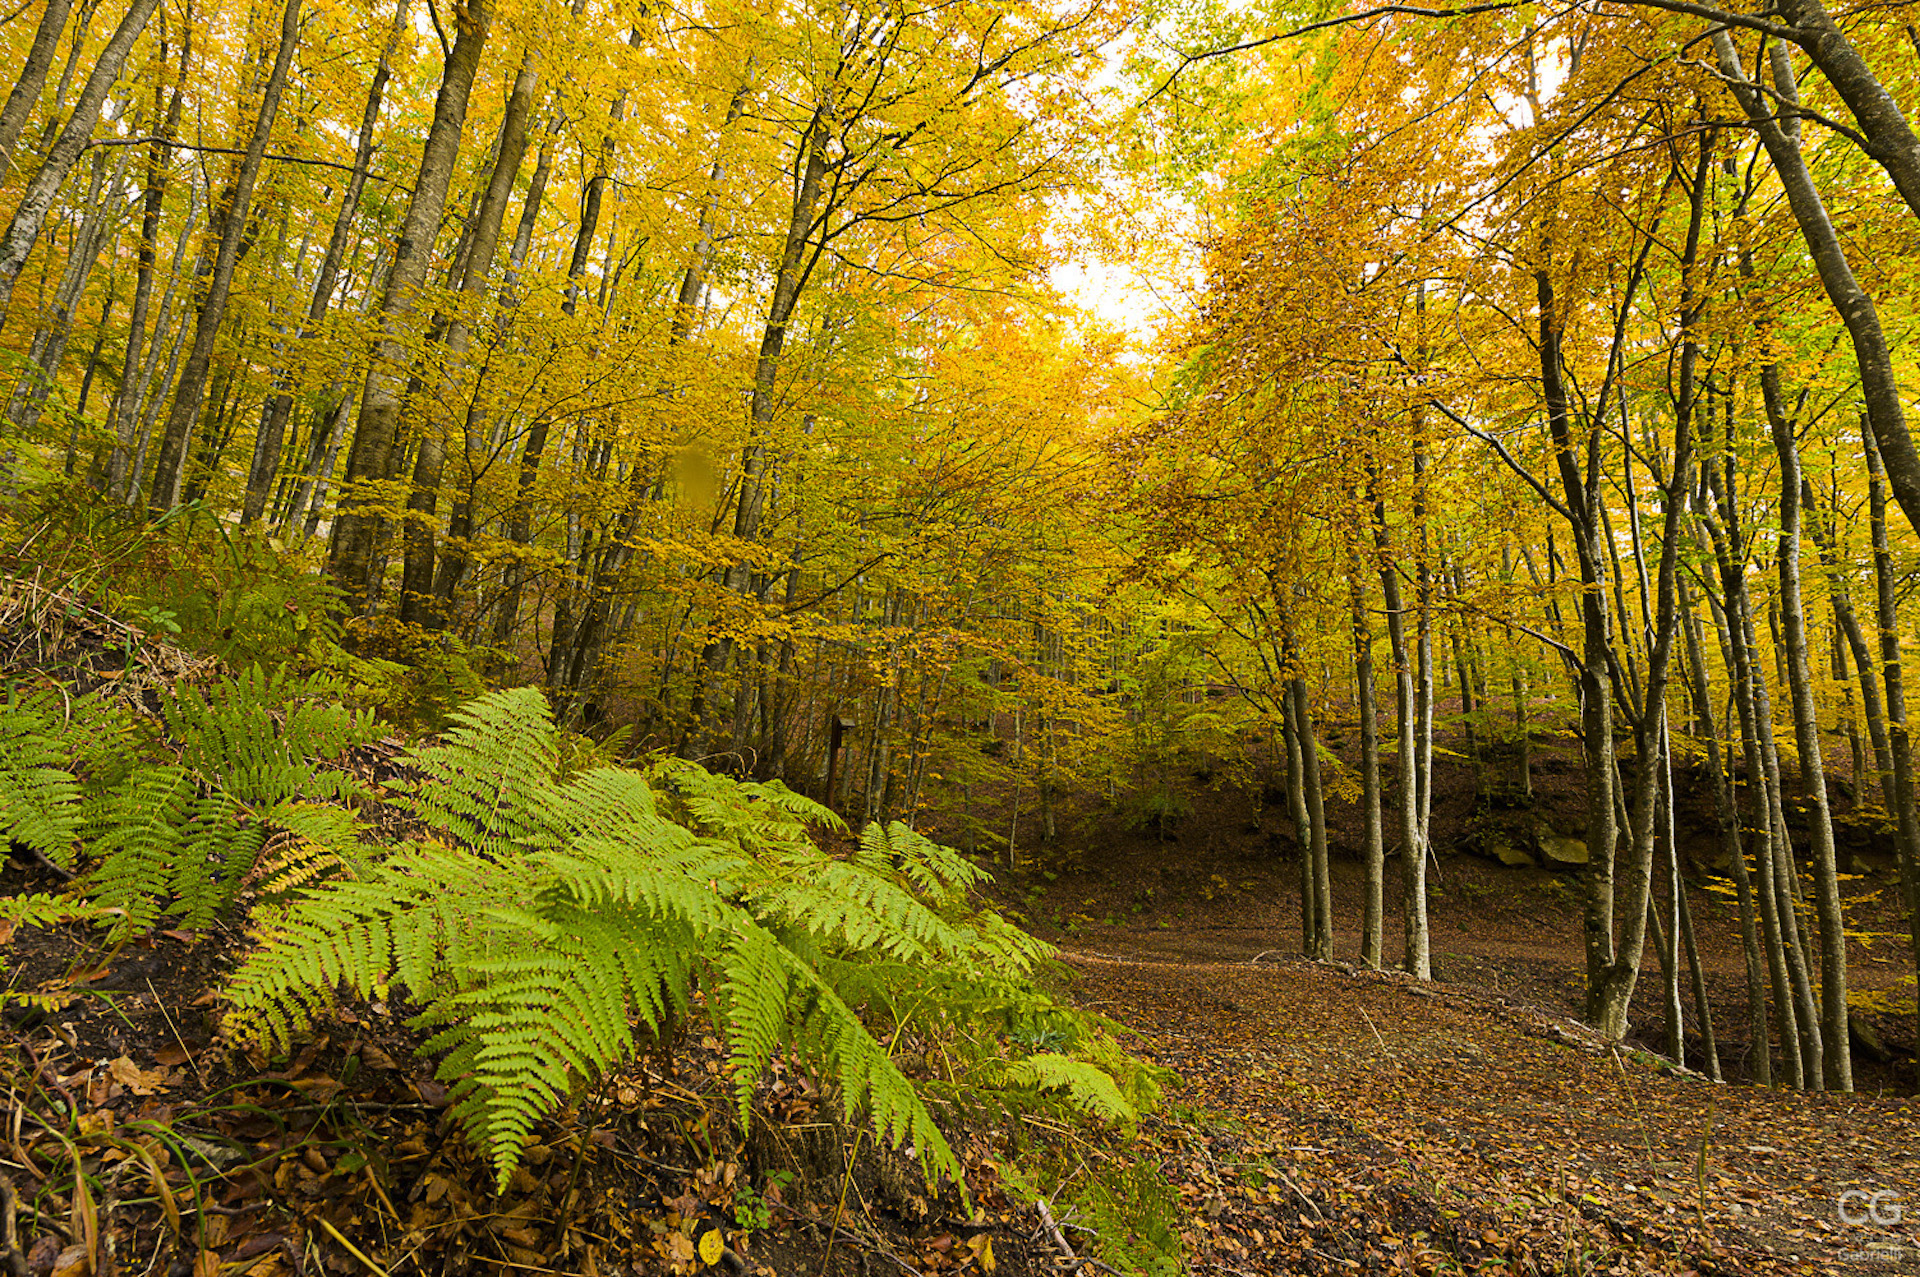 The Casentino Forest in autumn